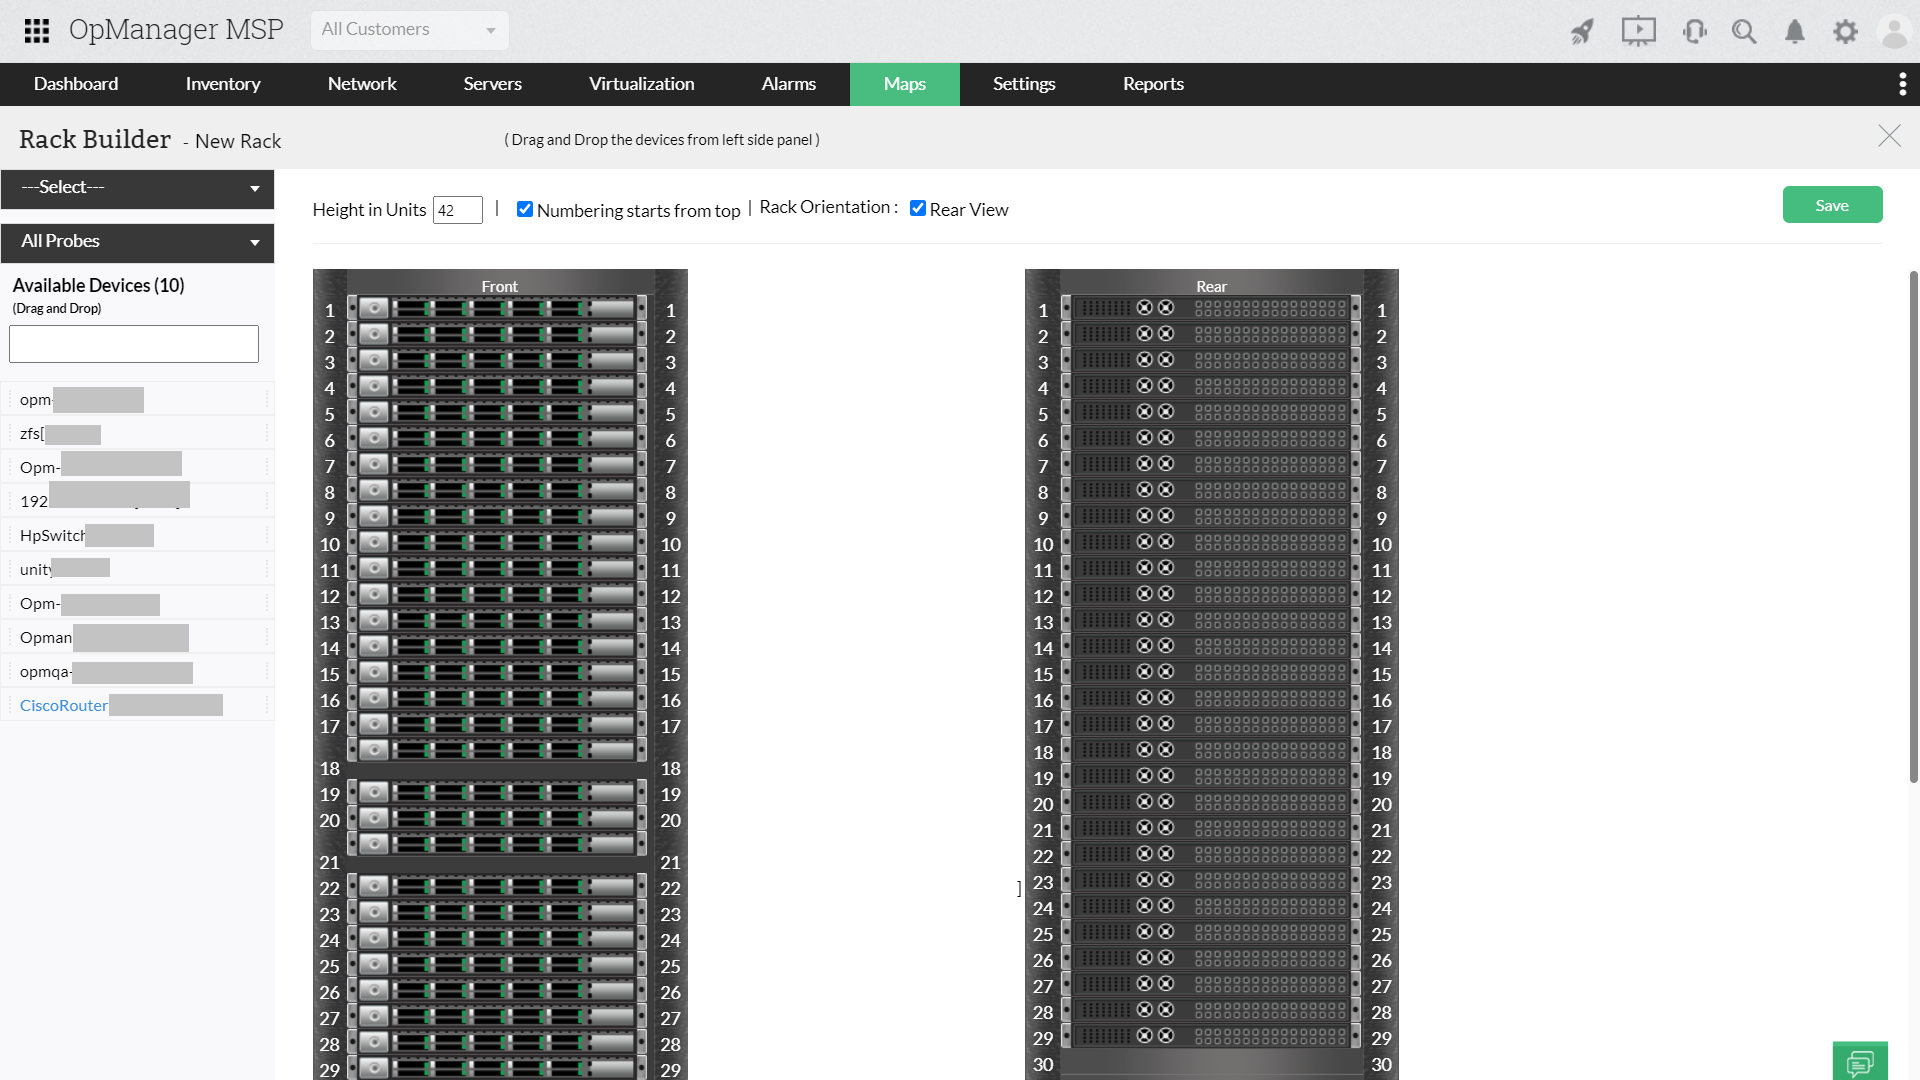 MSP Network Rack View - ManageEngine OpManager MSP